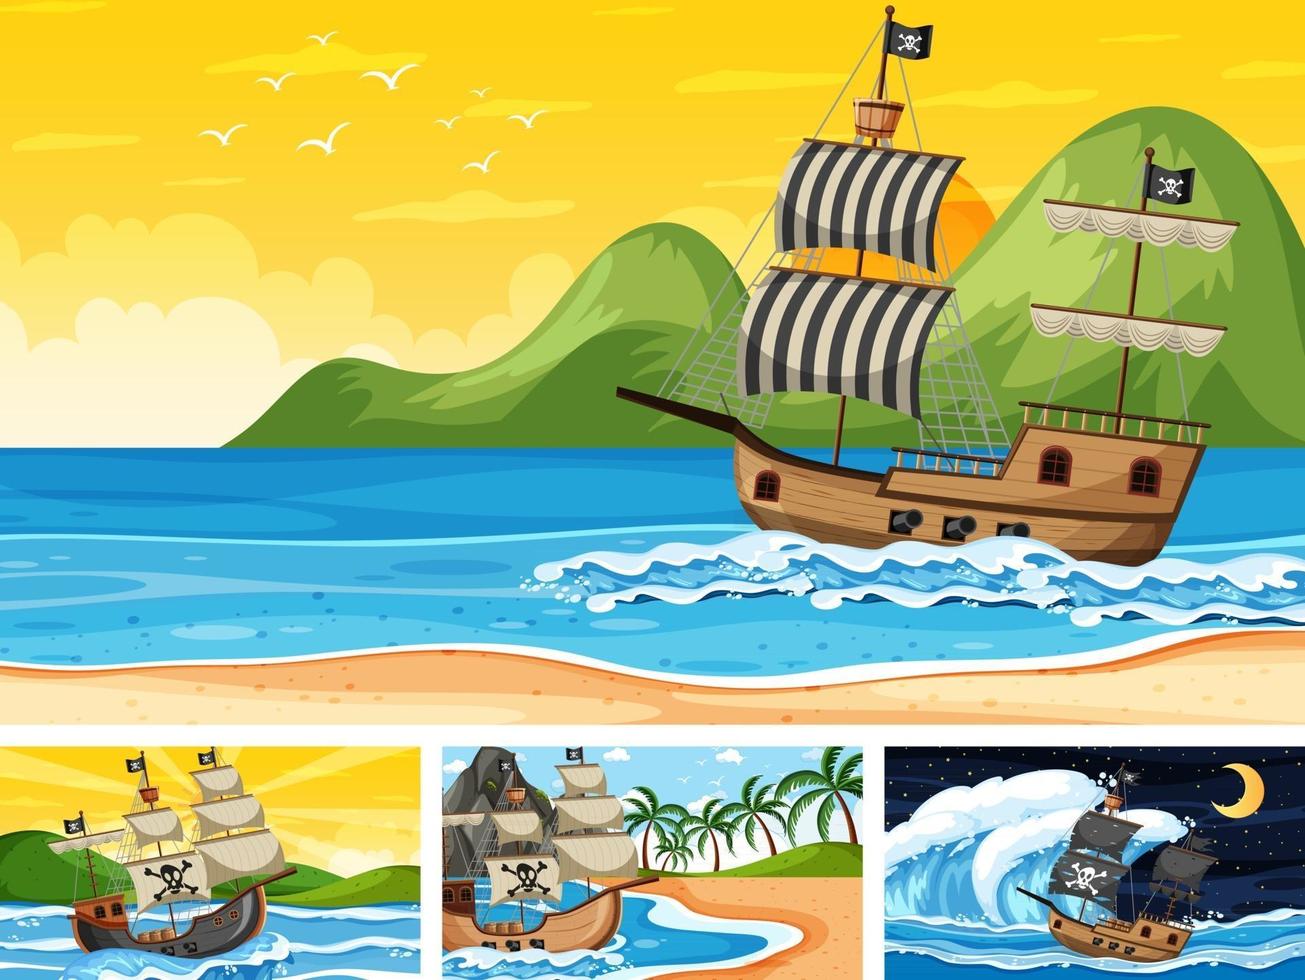 Set of Ocean with Pirate ship at different times scenes  in cartoon style vector